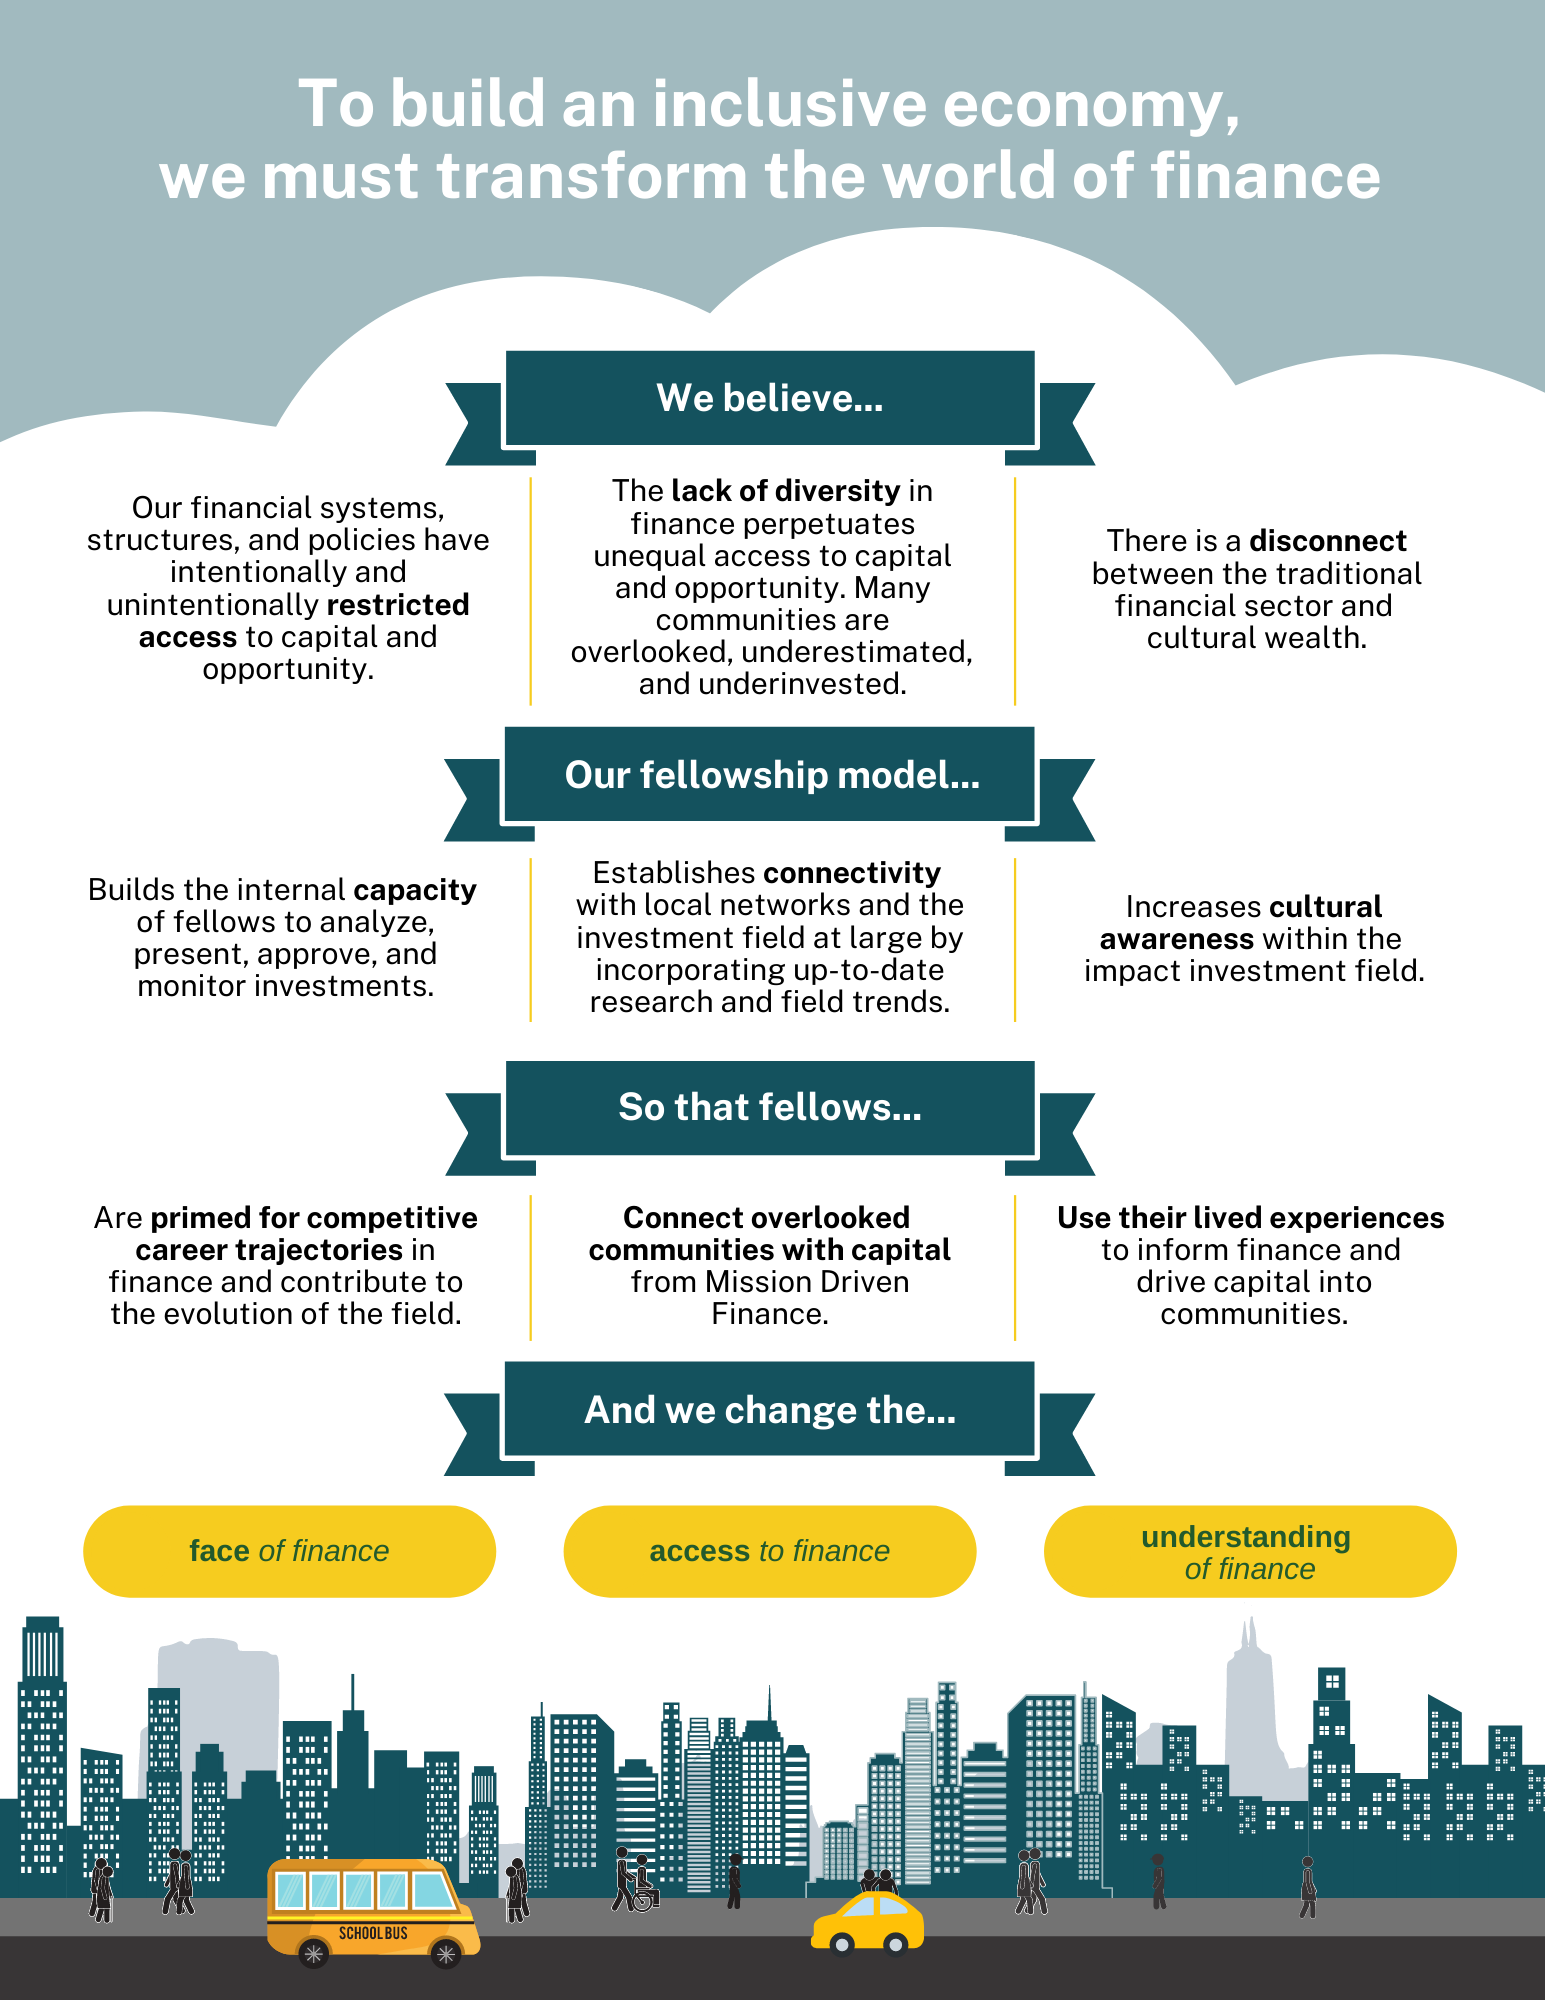 Fellowship theory of change infographic